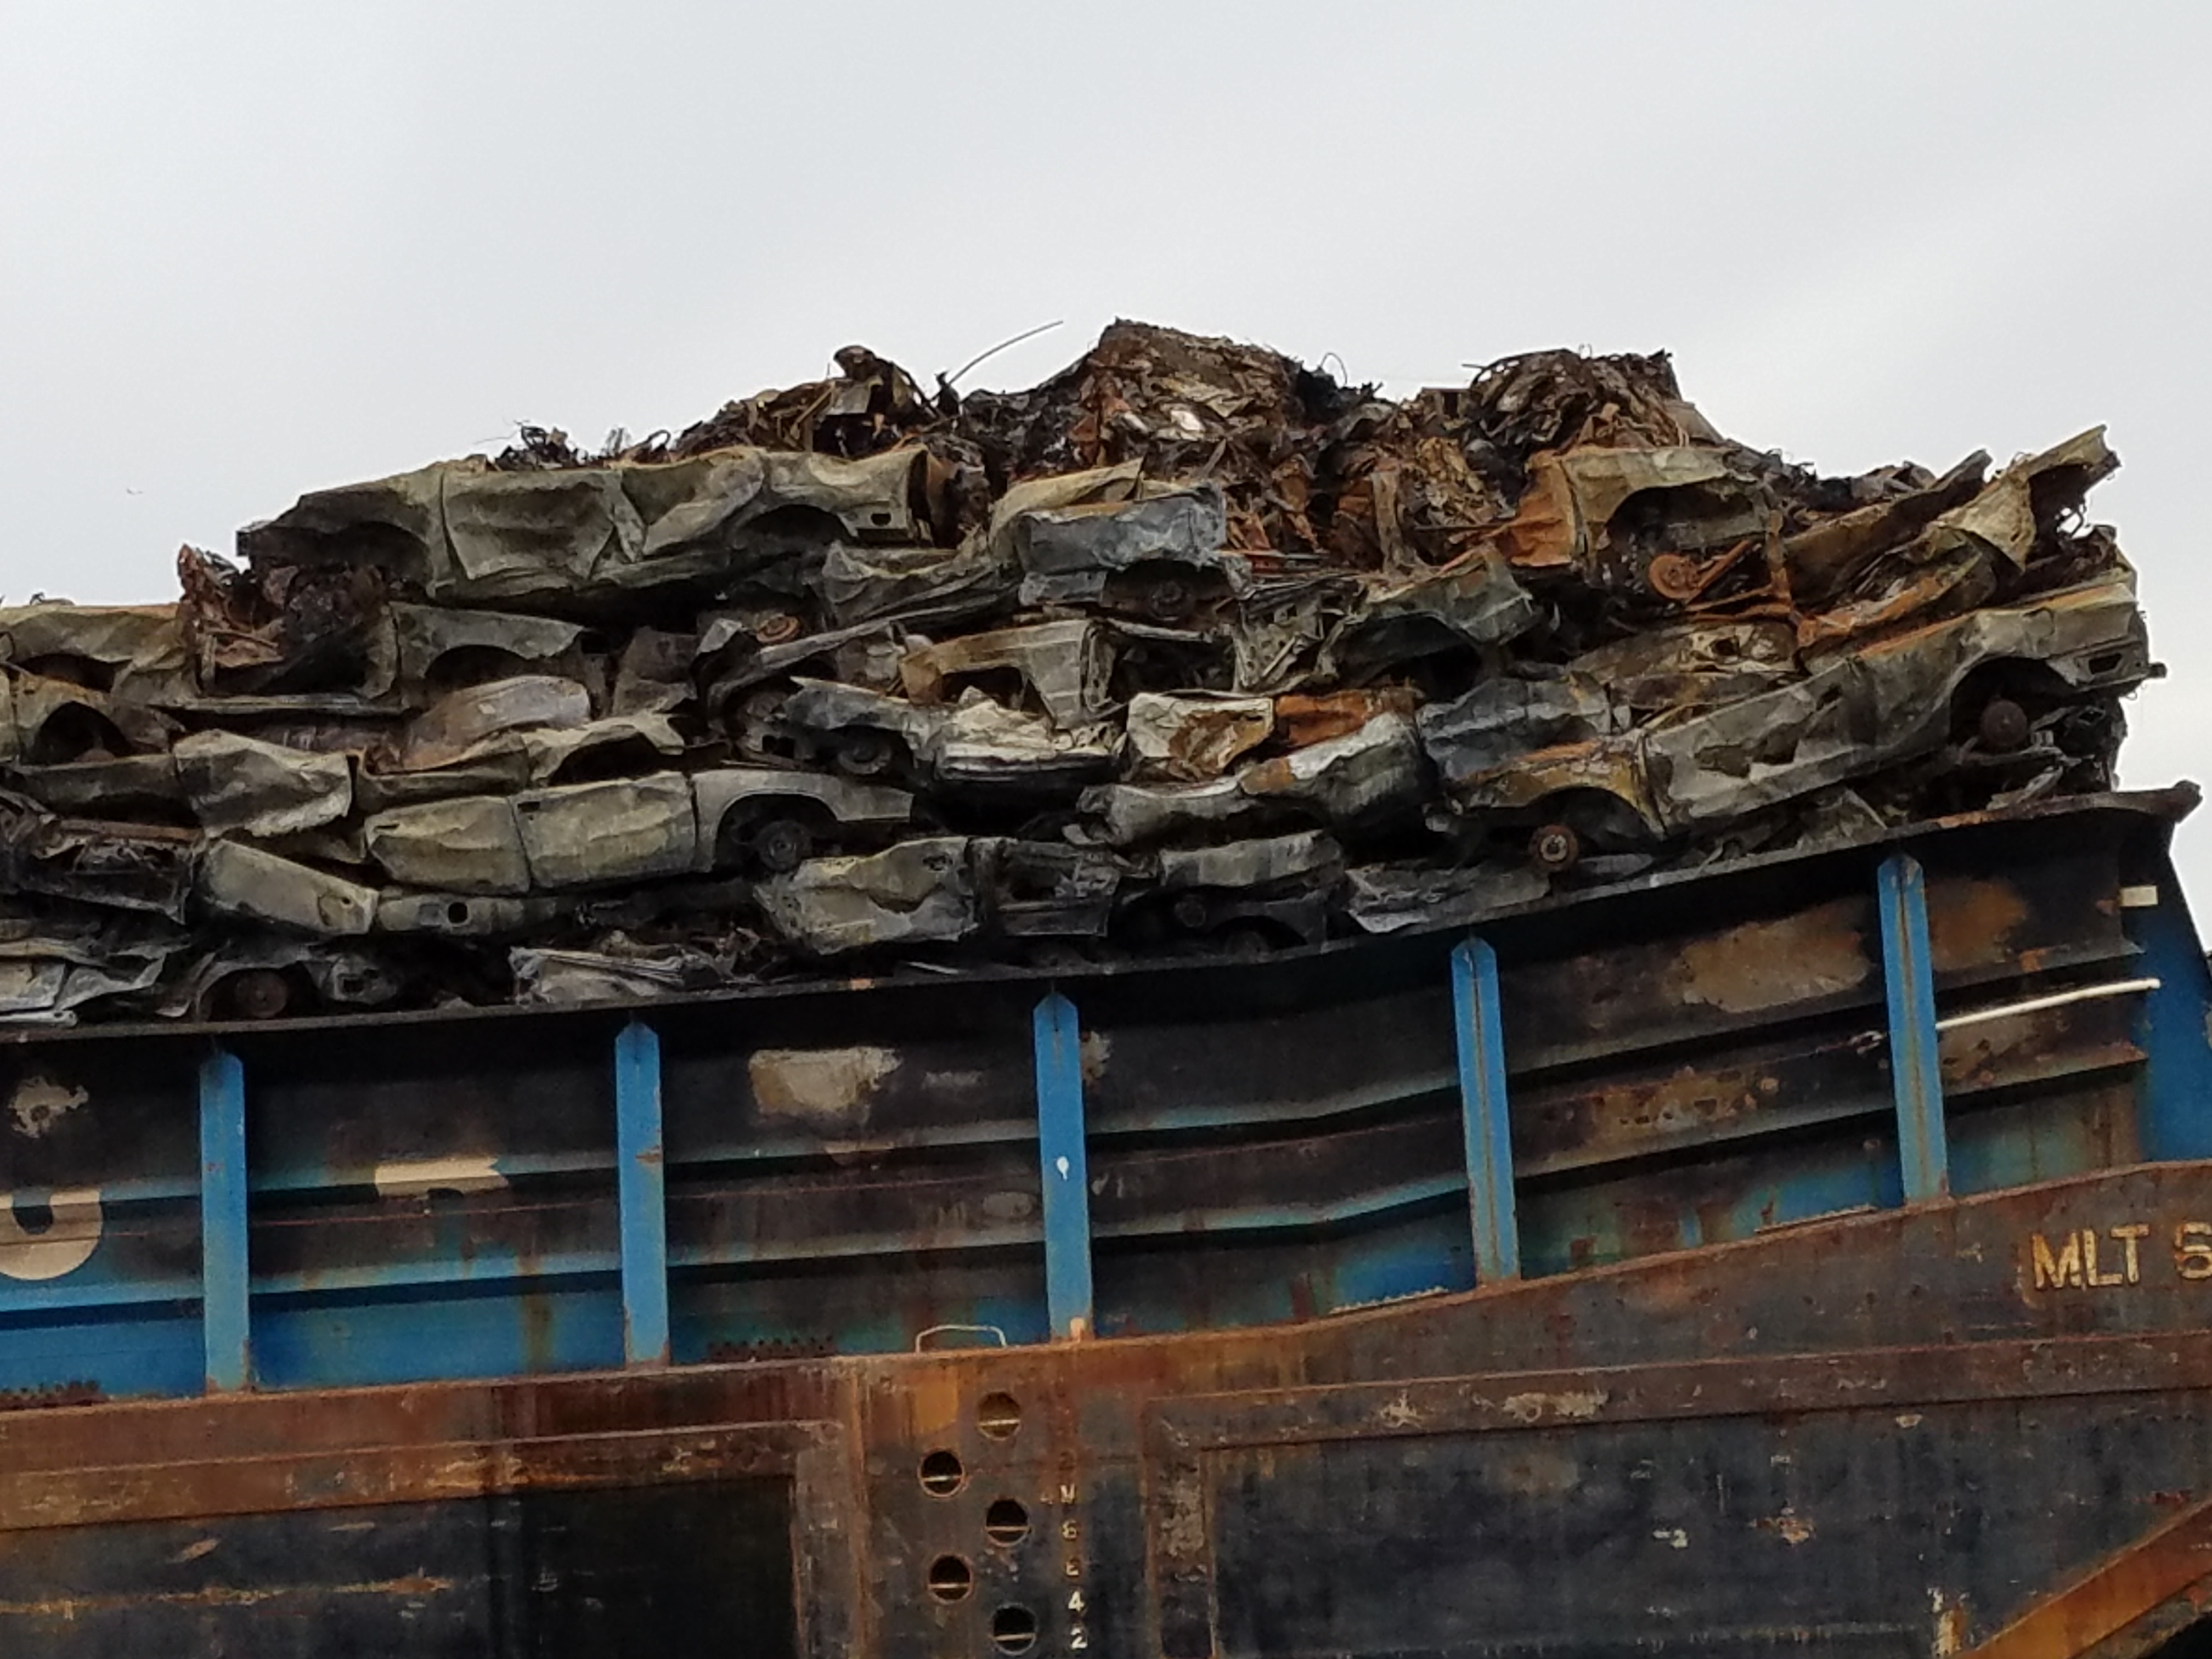 crushed cars on barge.